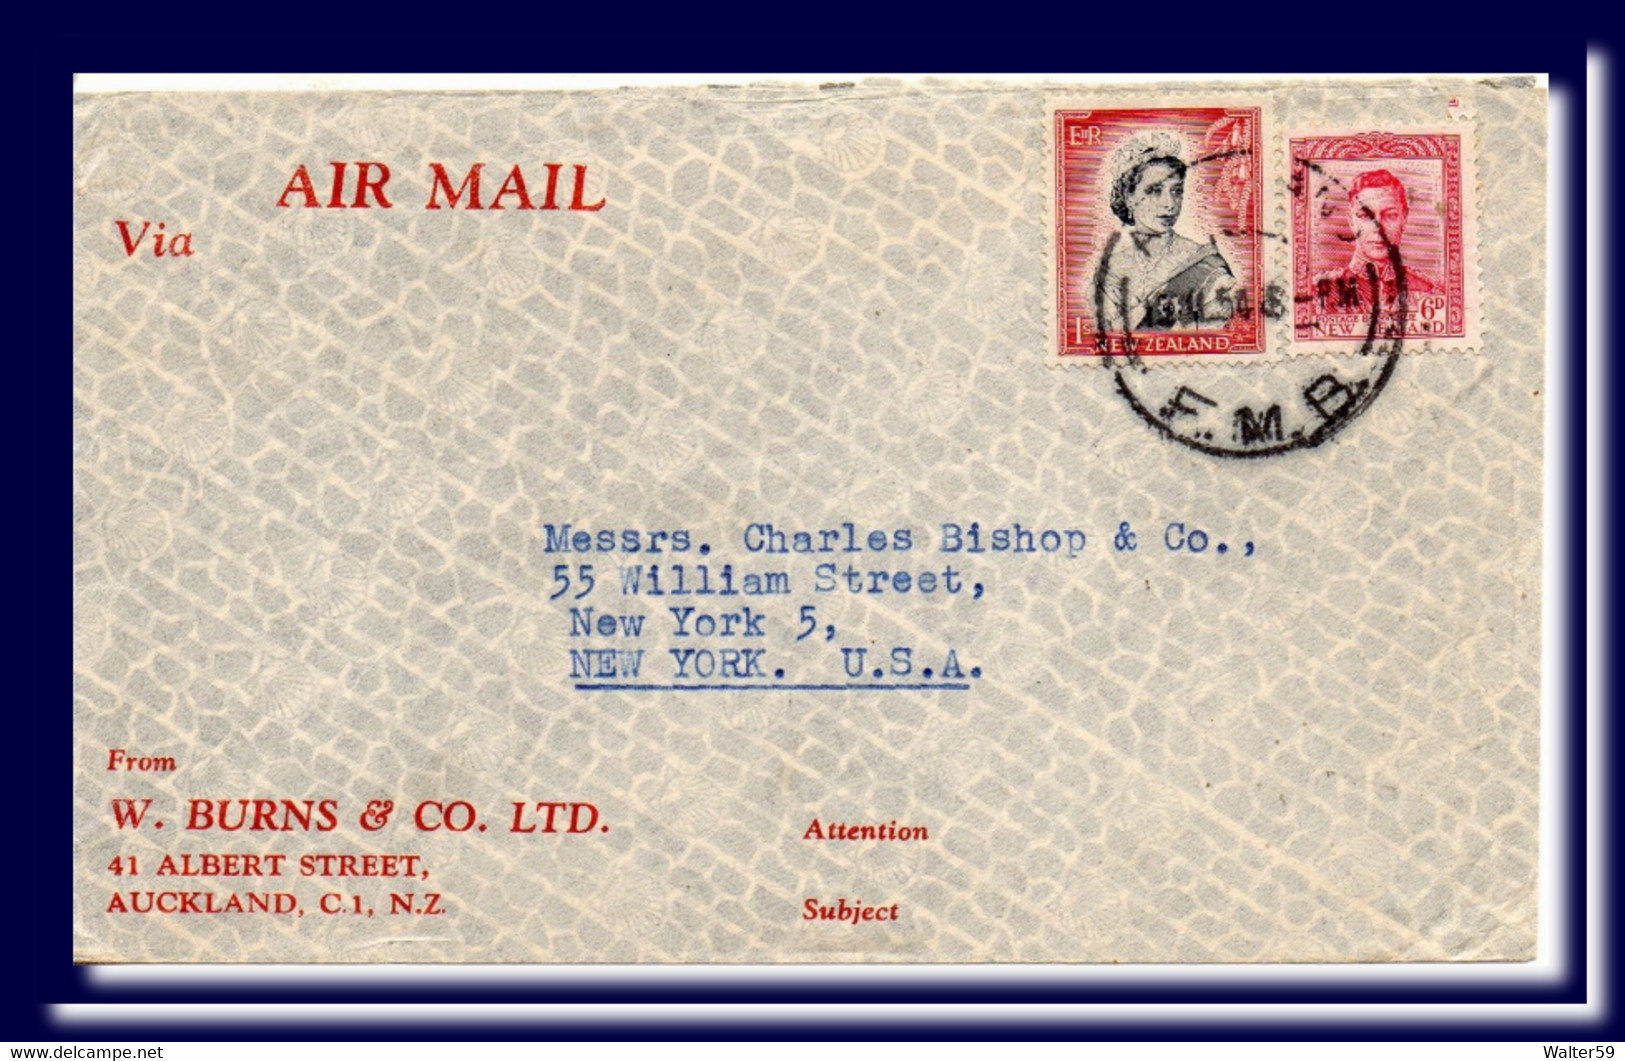 1954 New Zealand Air Mail Letter Auckland Sent To USA - Covers & Documents